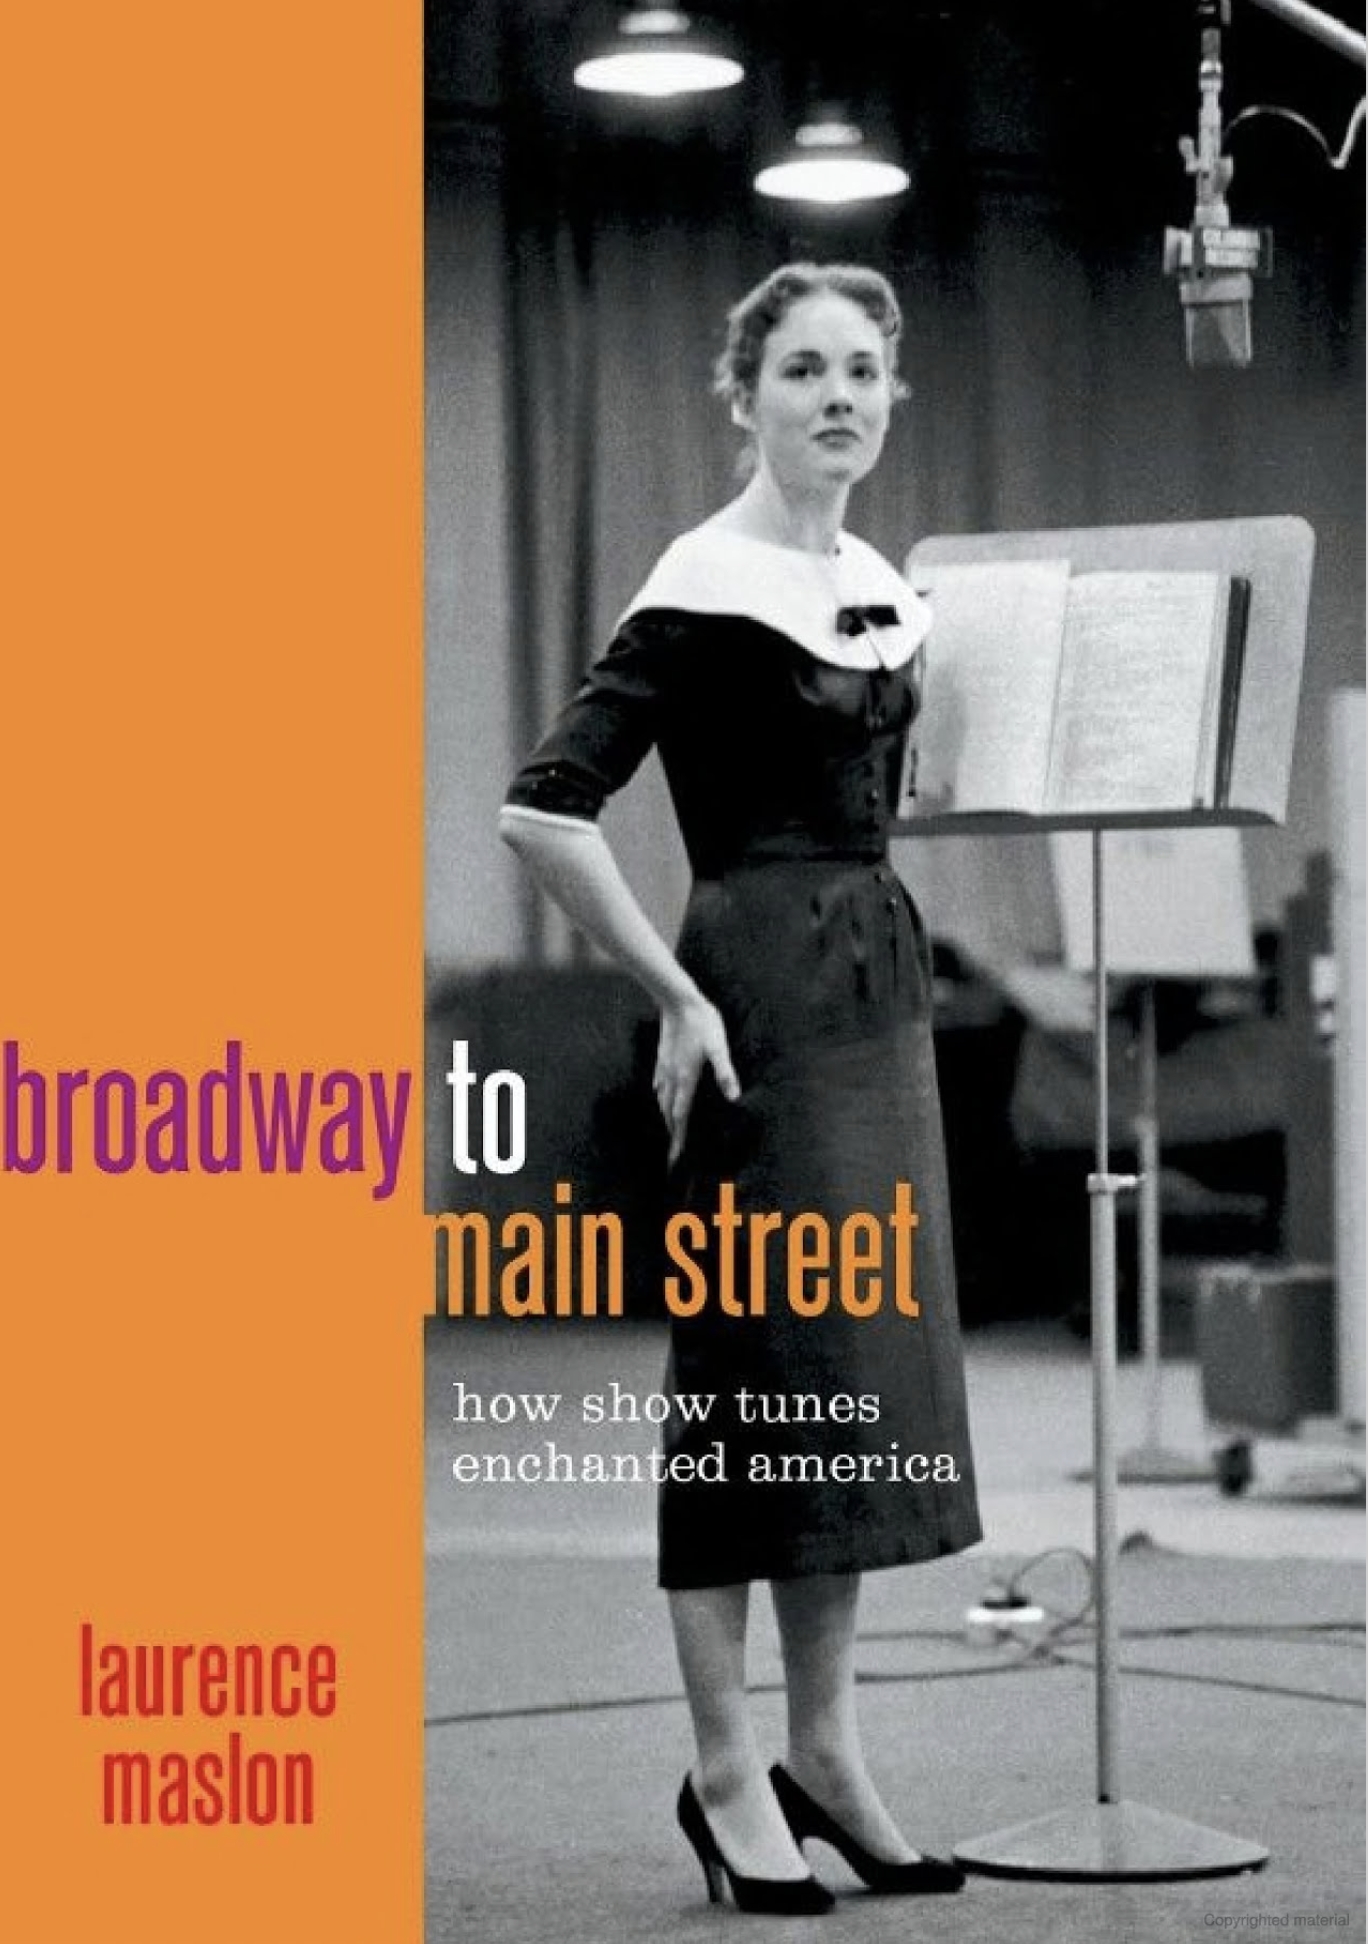 "Broadway to Main Street" by Laurence Maslon